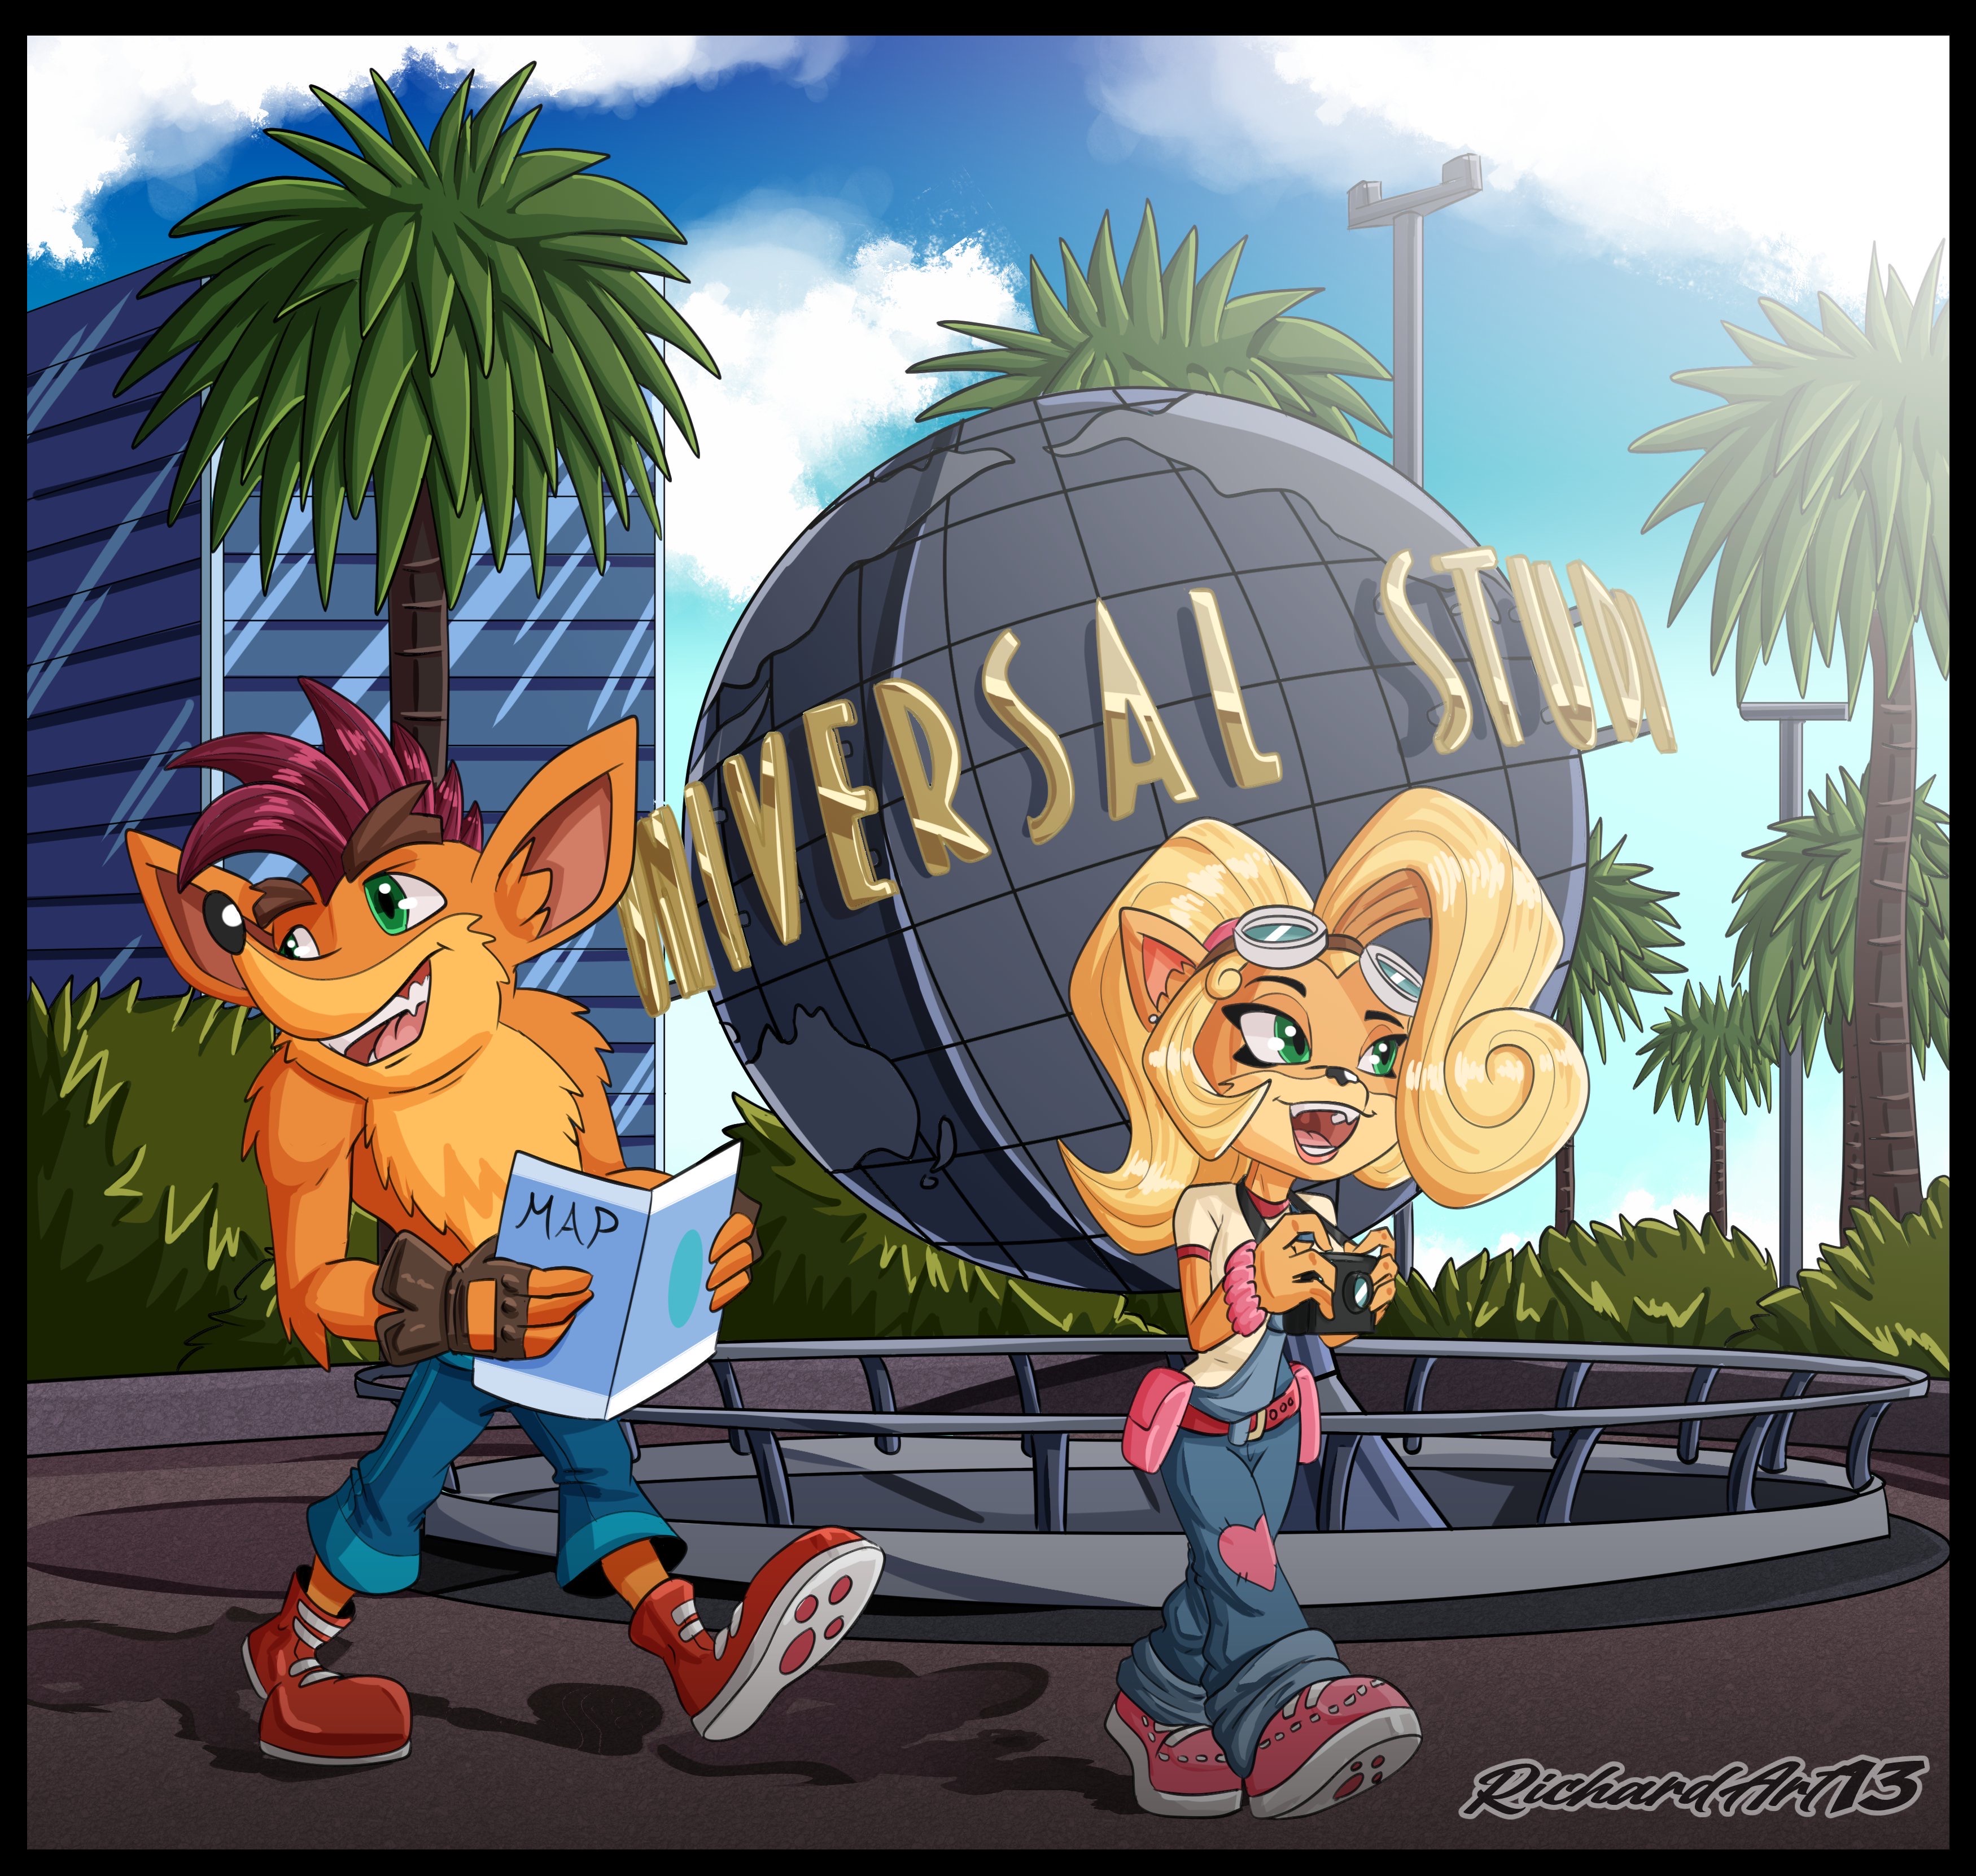 Crash and Coco at Universal Studios Hollywood by J986Esparza on DeviantArt